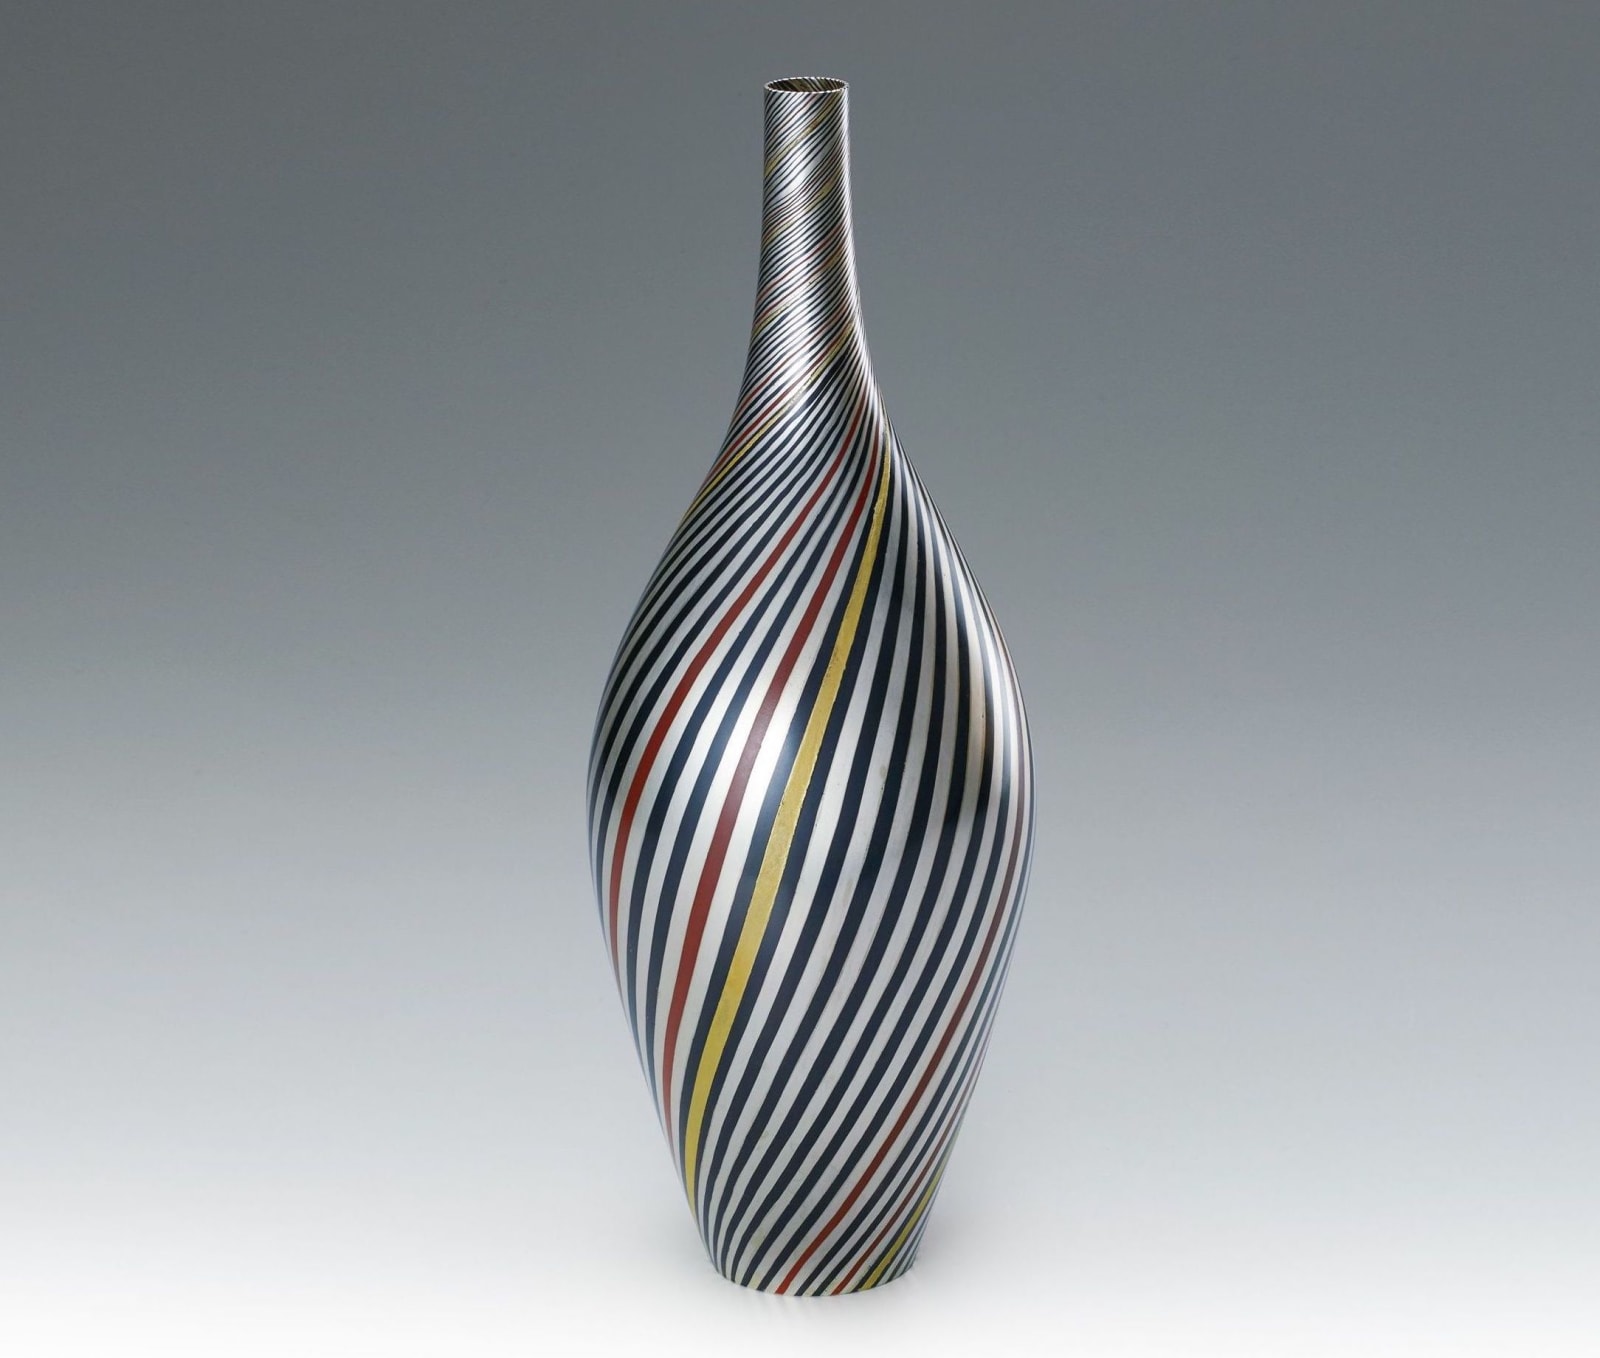 Hagiawase Vase Line, 2013 Gold, silver, shakudō and copper h. 13 3/8 x dia. 4 3/4 in. (34 x 12 cm)